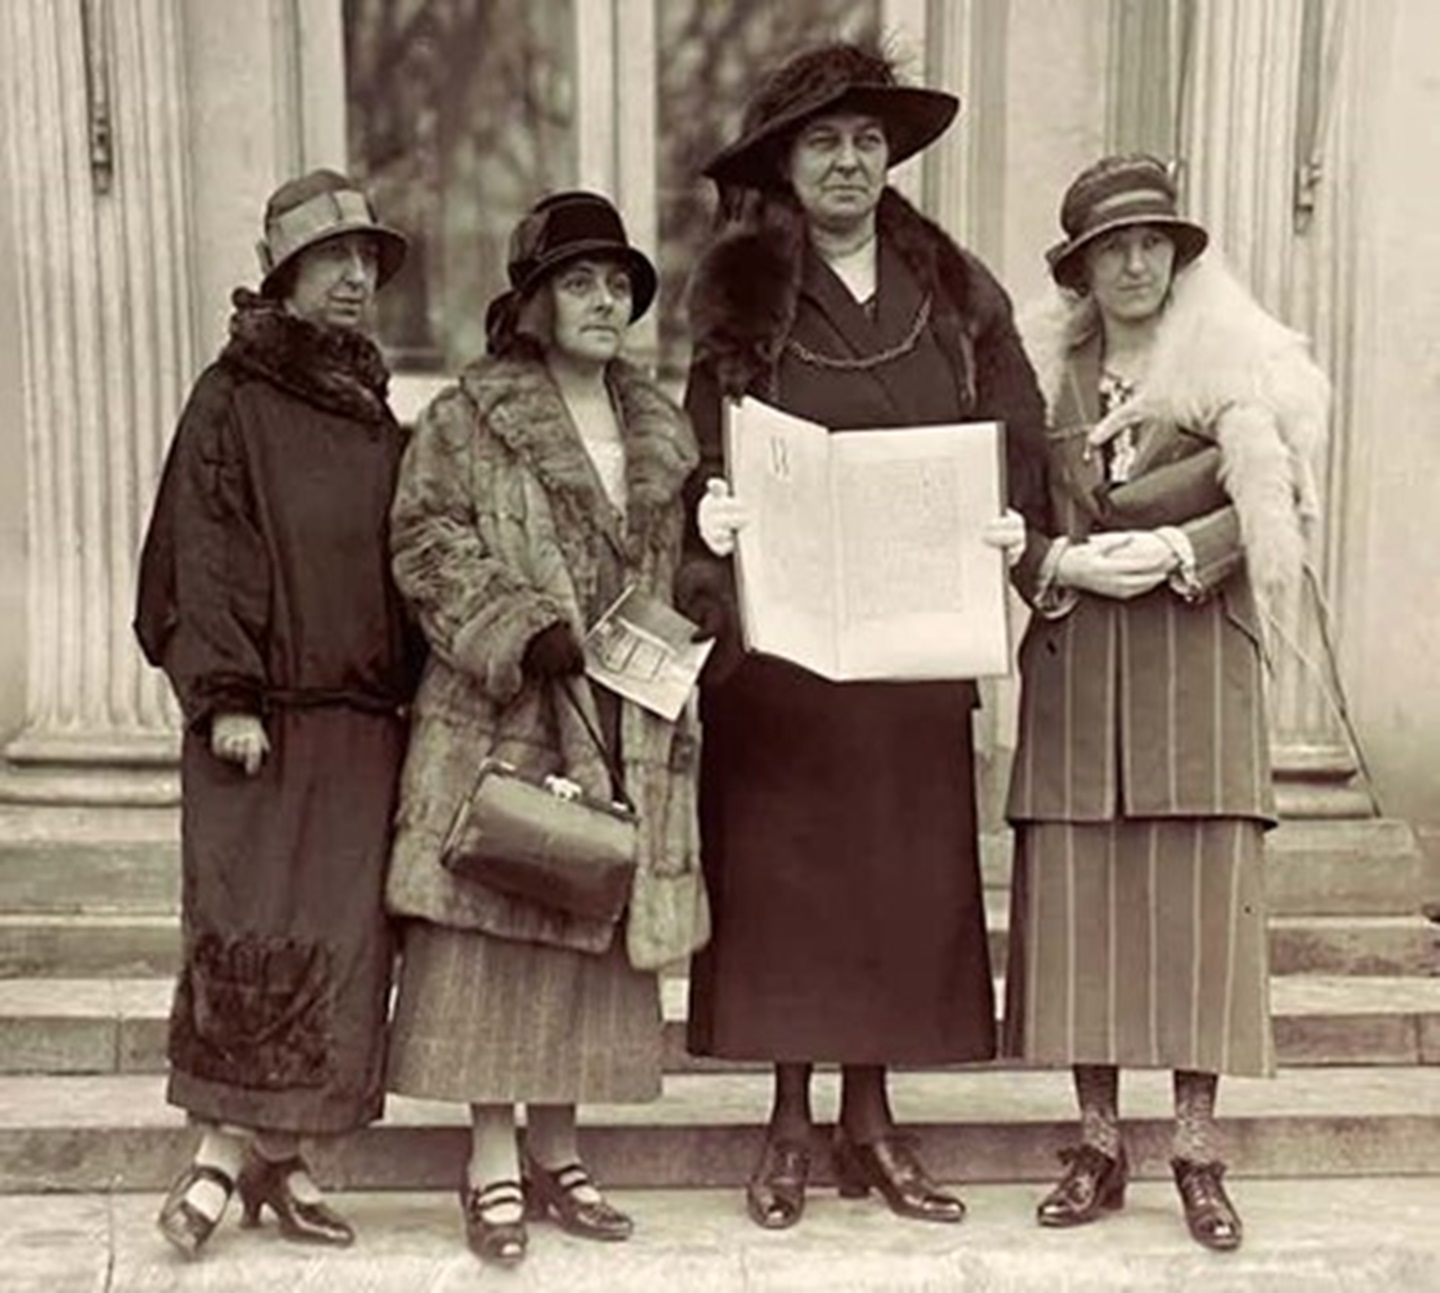 Annie Hughes Griffiths holds the Welsh women’s petition for peace at the White House on February 21 1924, alongside (l-r) Gladys Thomas, Mary Ellis and Elined Prys. WCIA/Temple of Peace Archives, Author provided (no reuse)